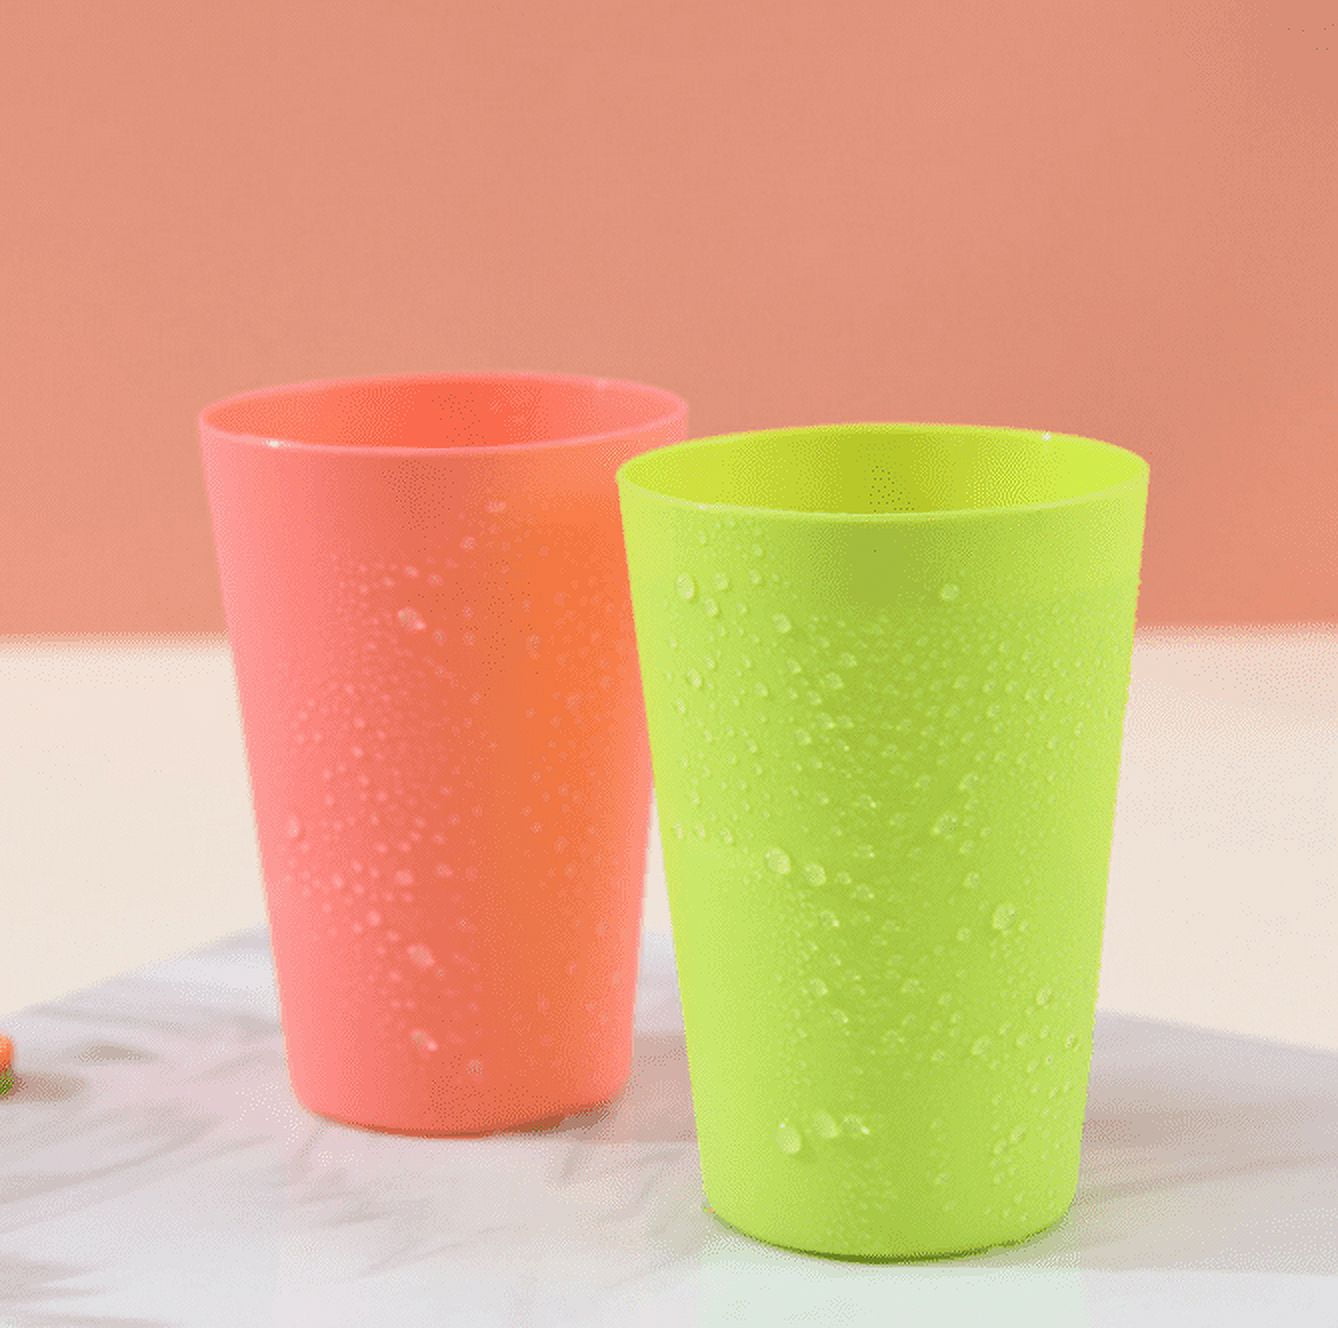 walmart has these gorgeous ribbed plastic ware cups for $1! Such a cu